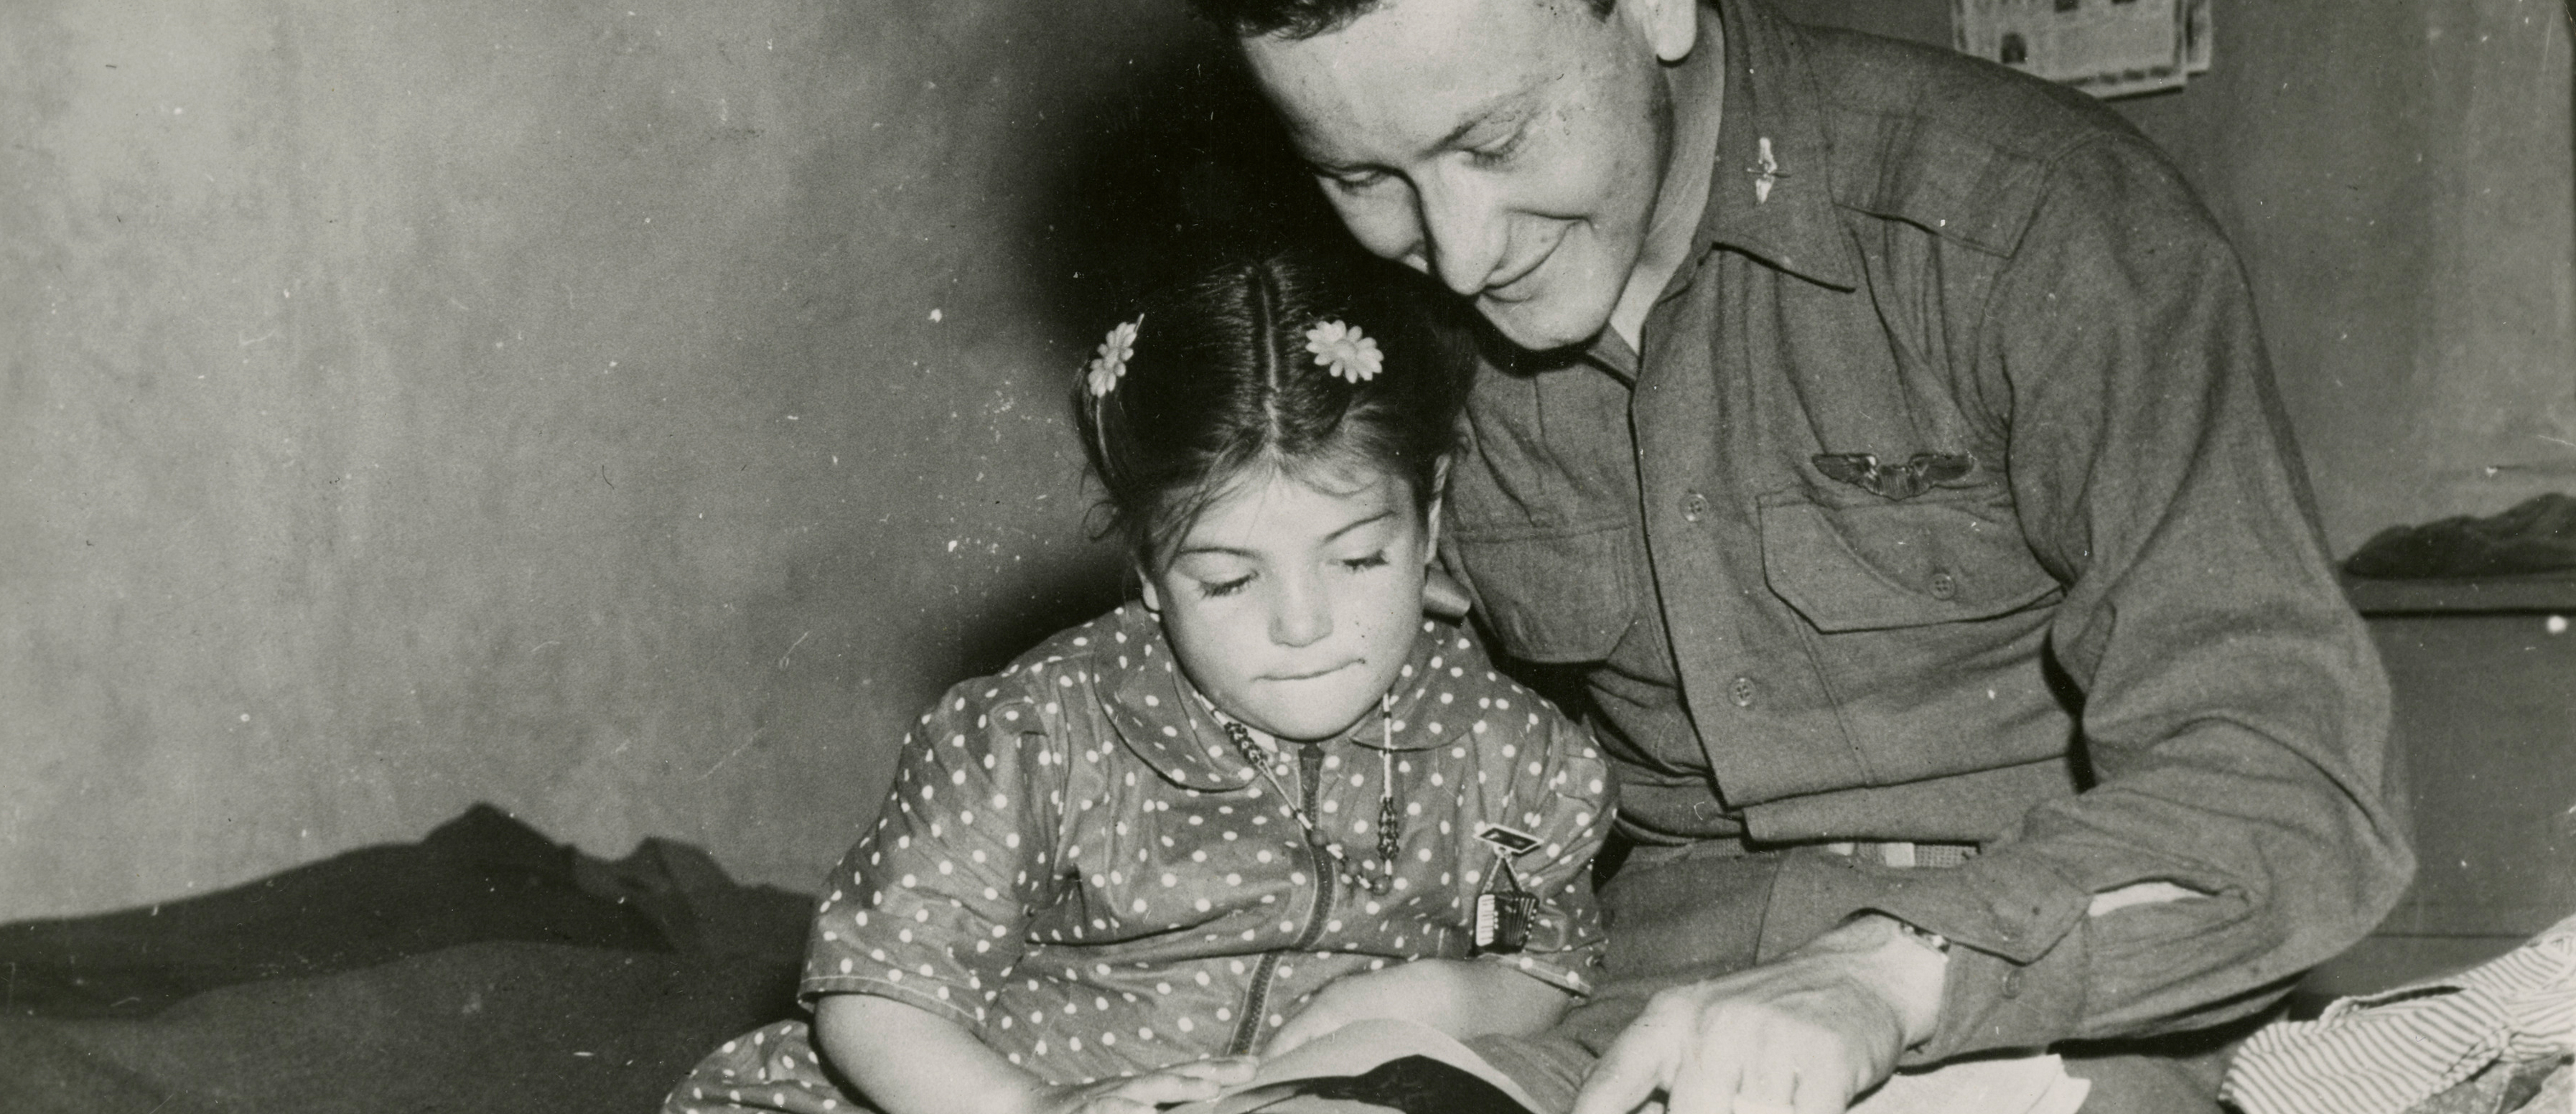 US Army soldier reads to girl 